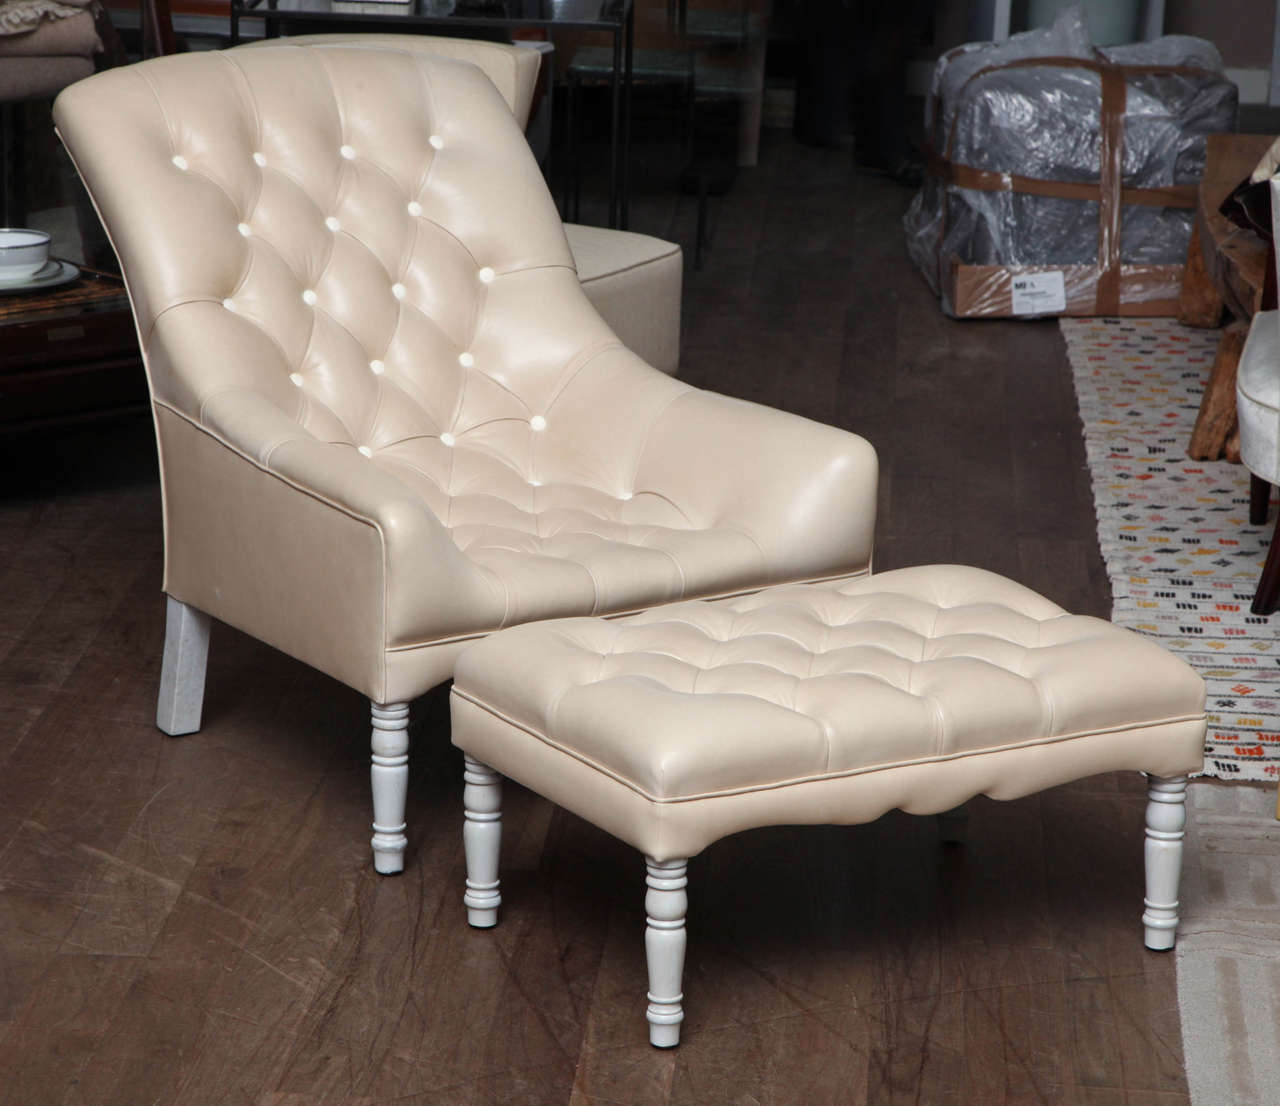 Tufted scoop lounge chair & ottoman upholstered in bone leather with hair-on-hide covered buttons and whitewashed turned legs circa 1960
Chair: 28.5